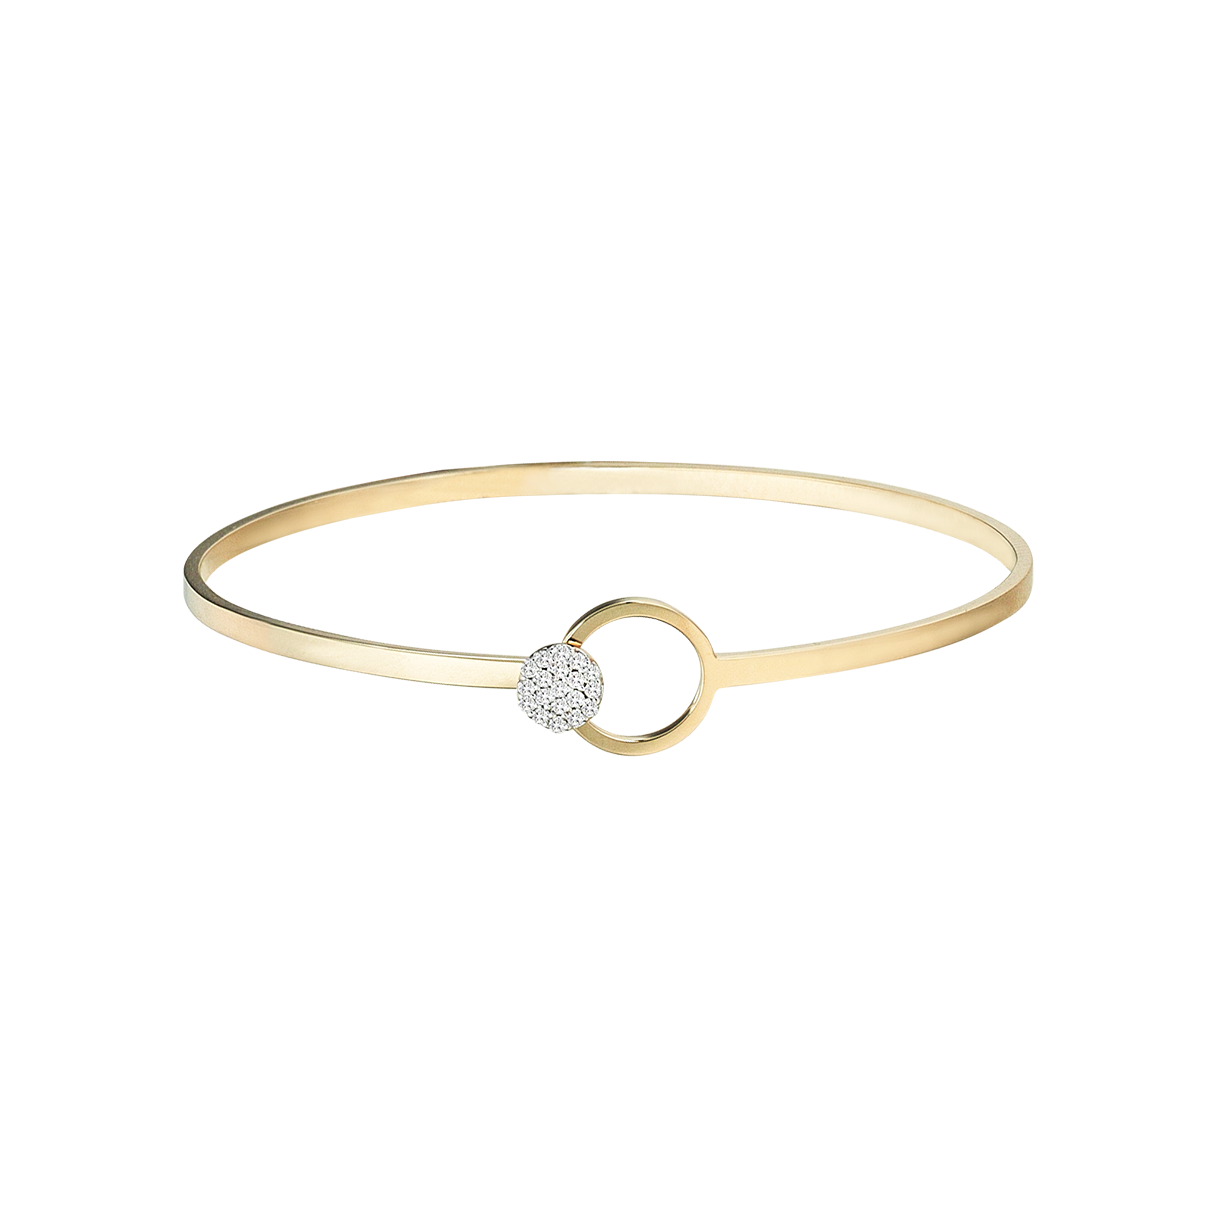 Pave Rigid Circular Bracelet in Yellow Gold - Her Story Shop